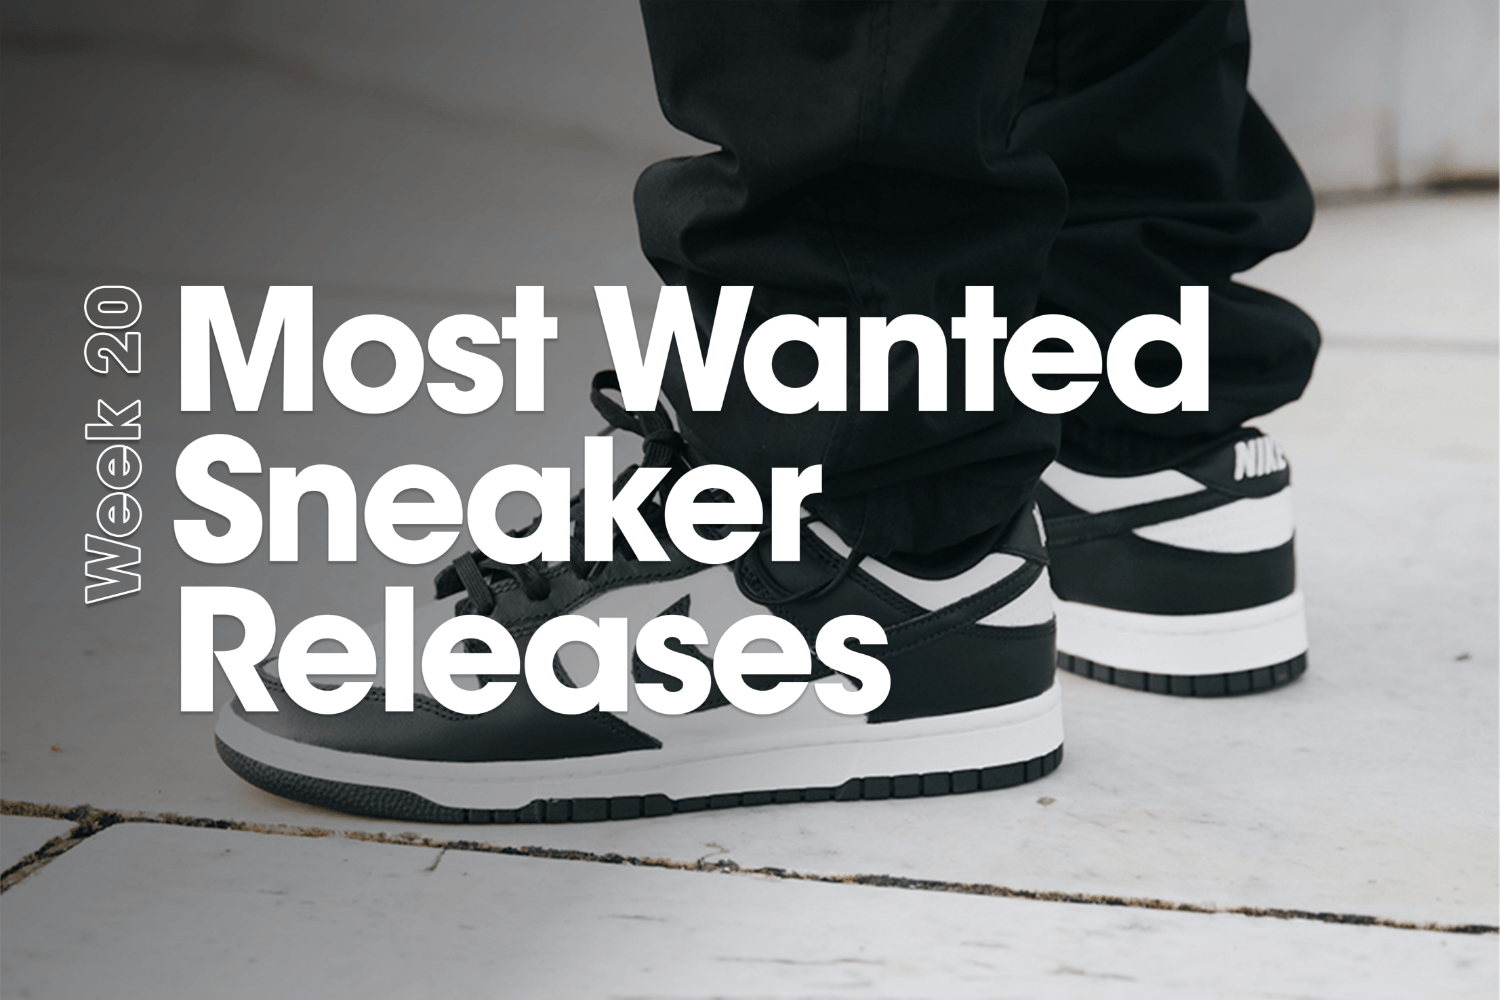 Die most wanted Sneaker Releases - Woche 20